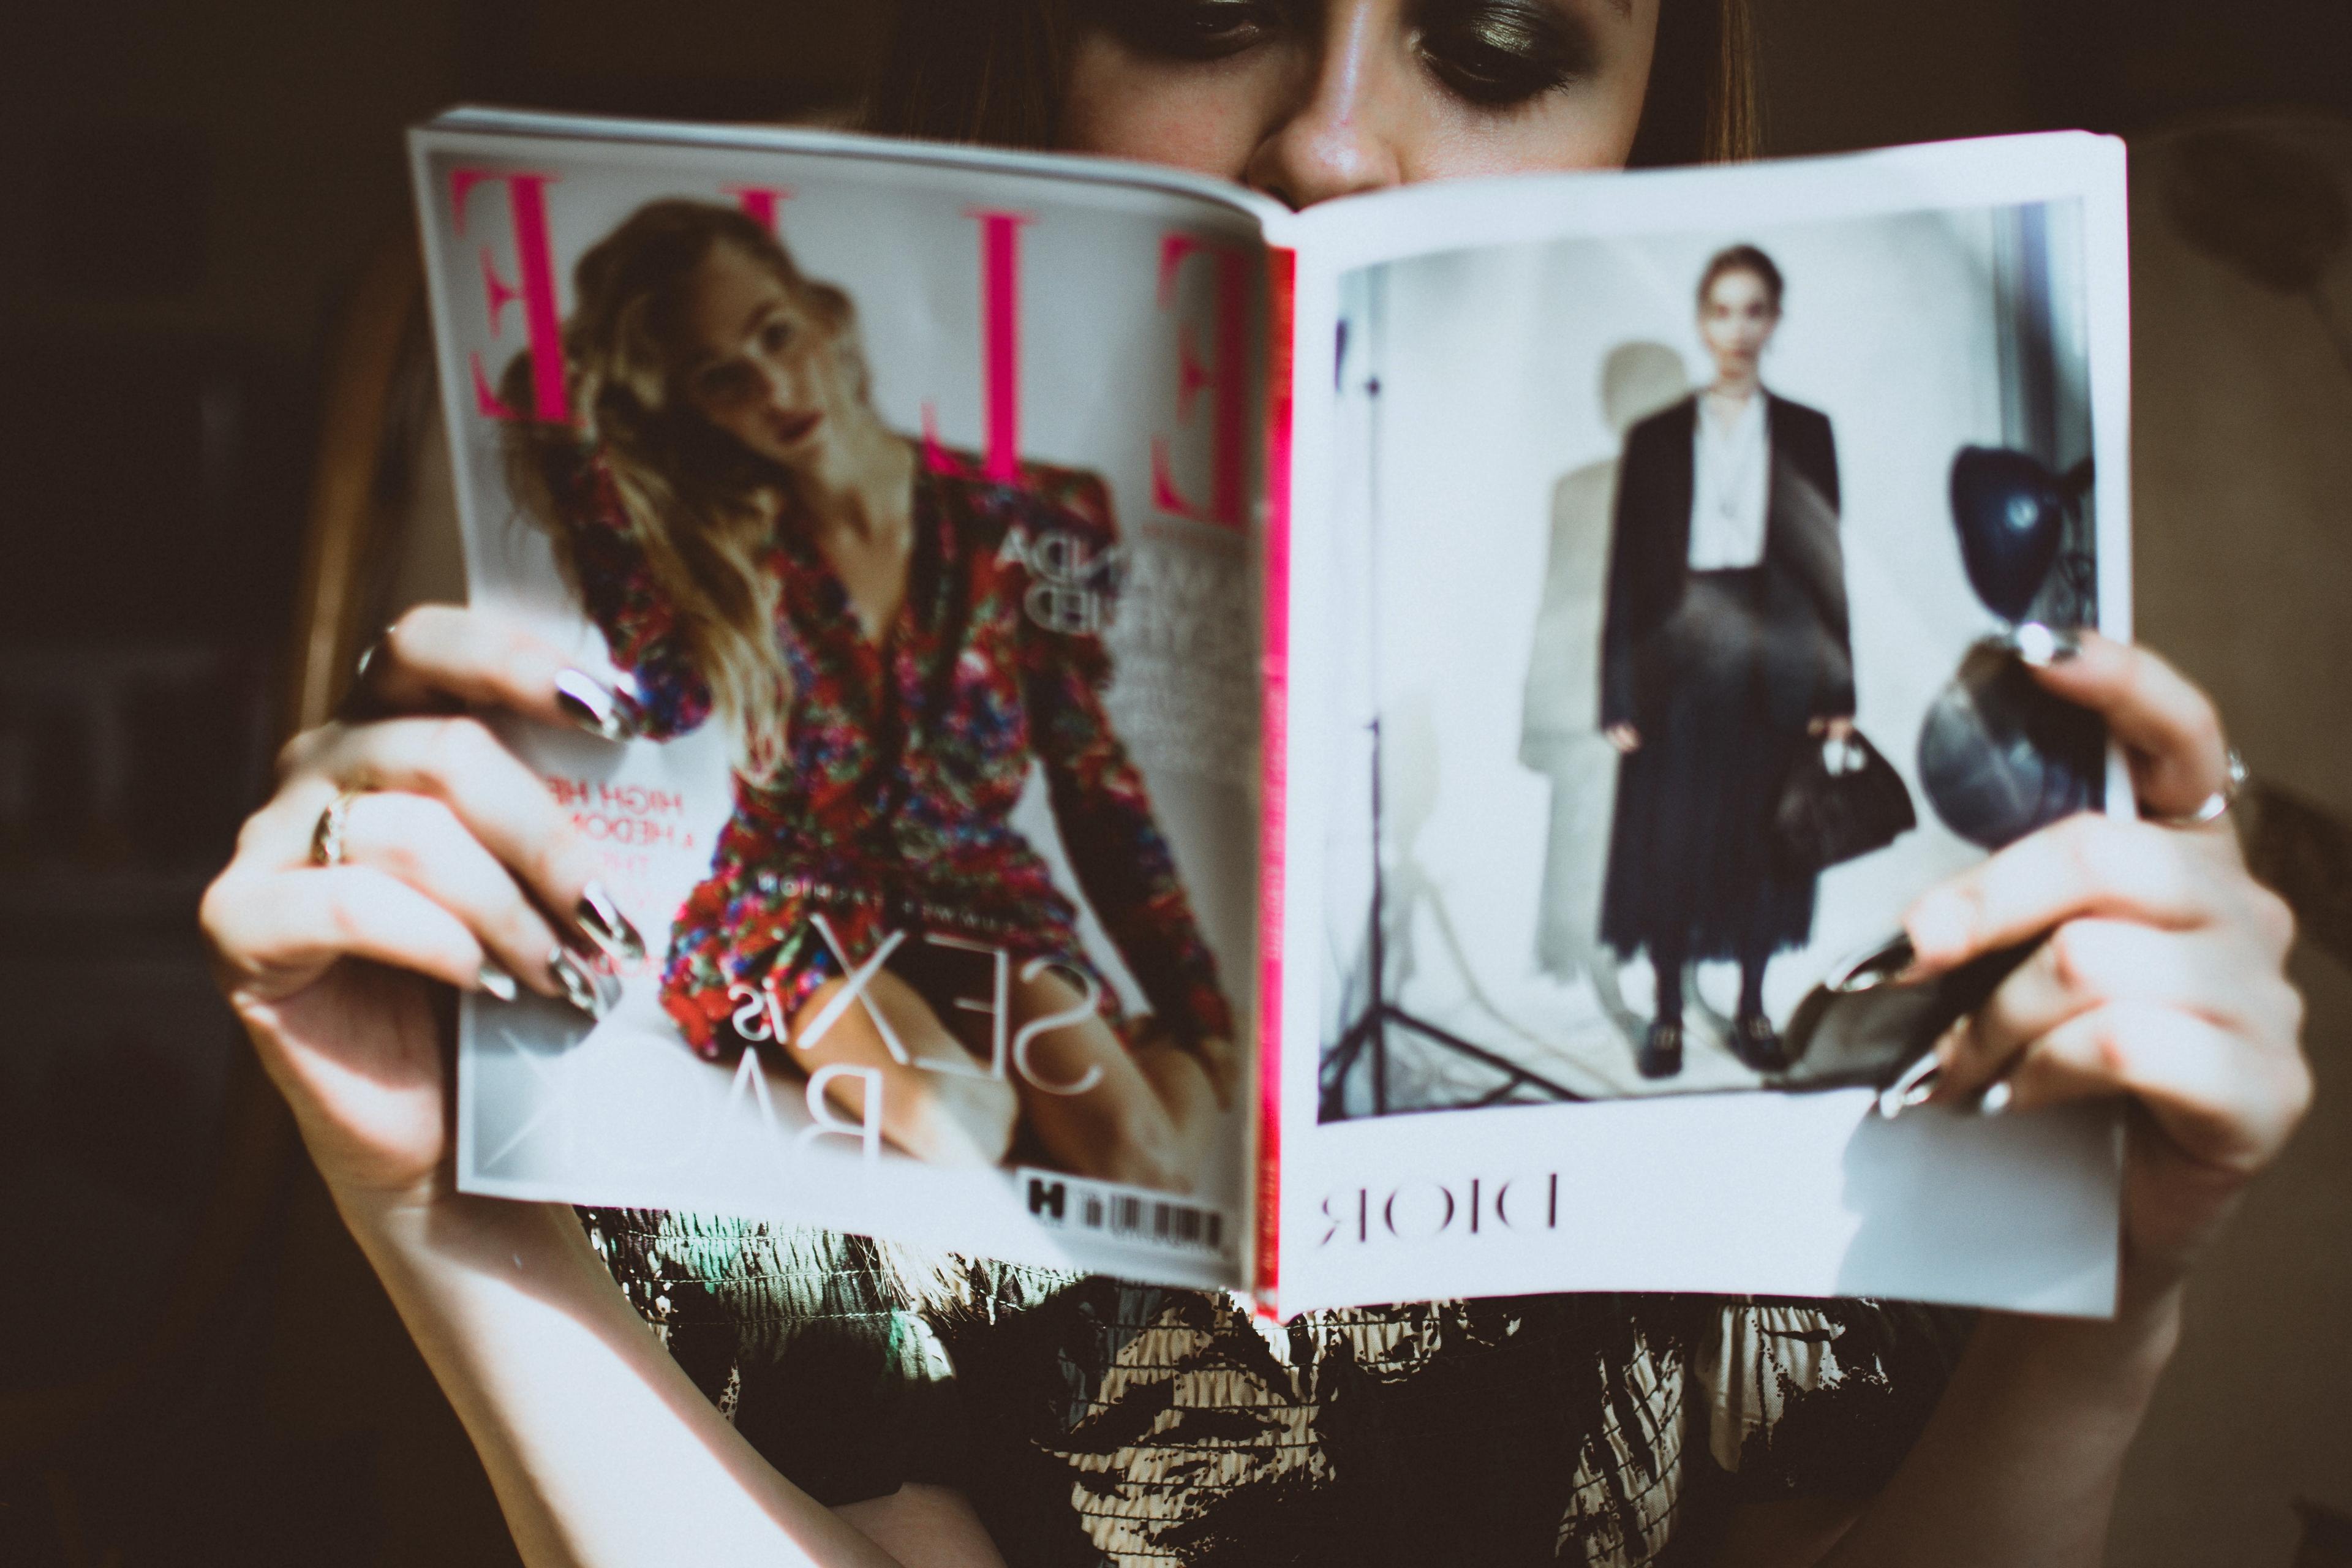 A woman reading a fashion magazine held up to obscure most of her face